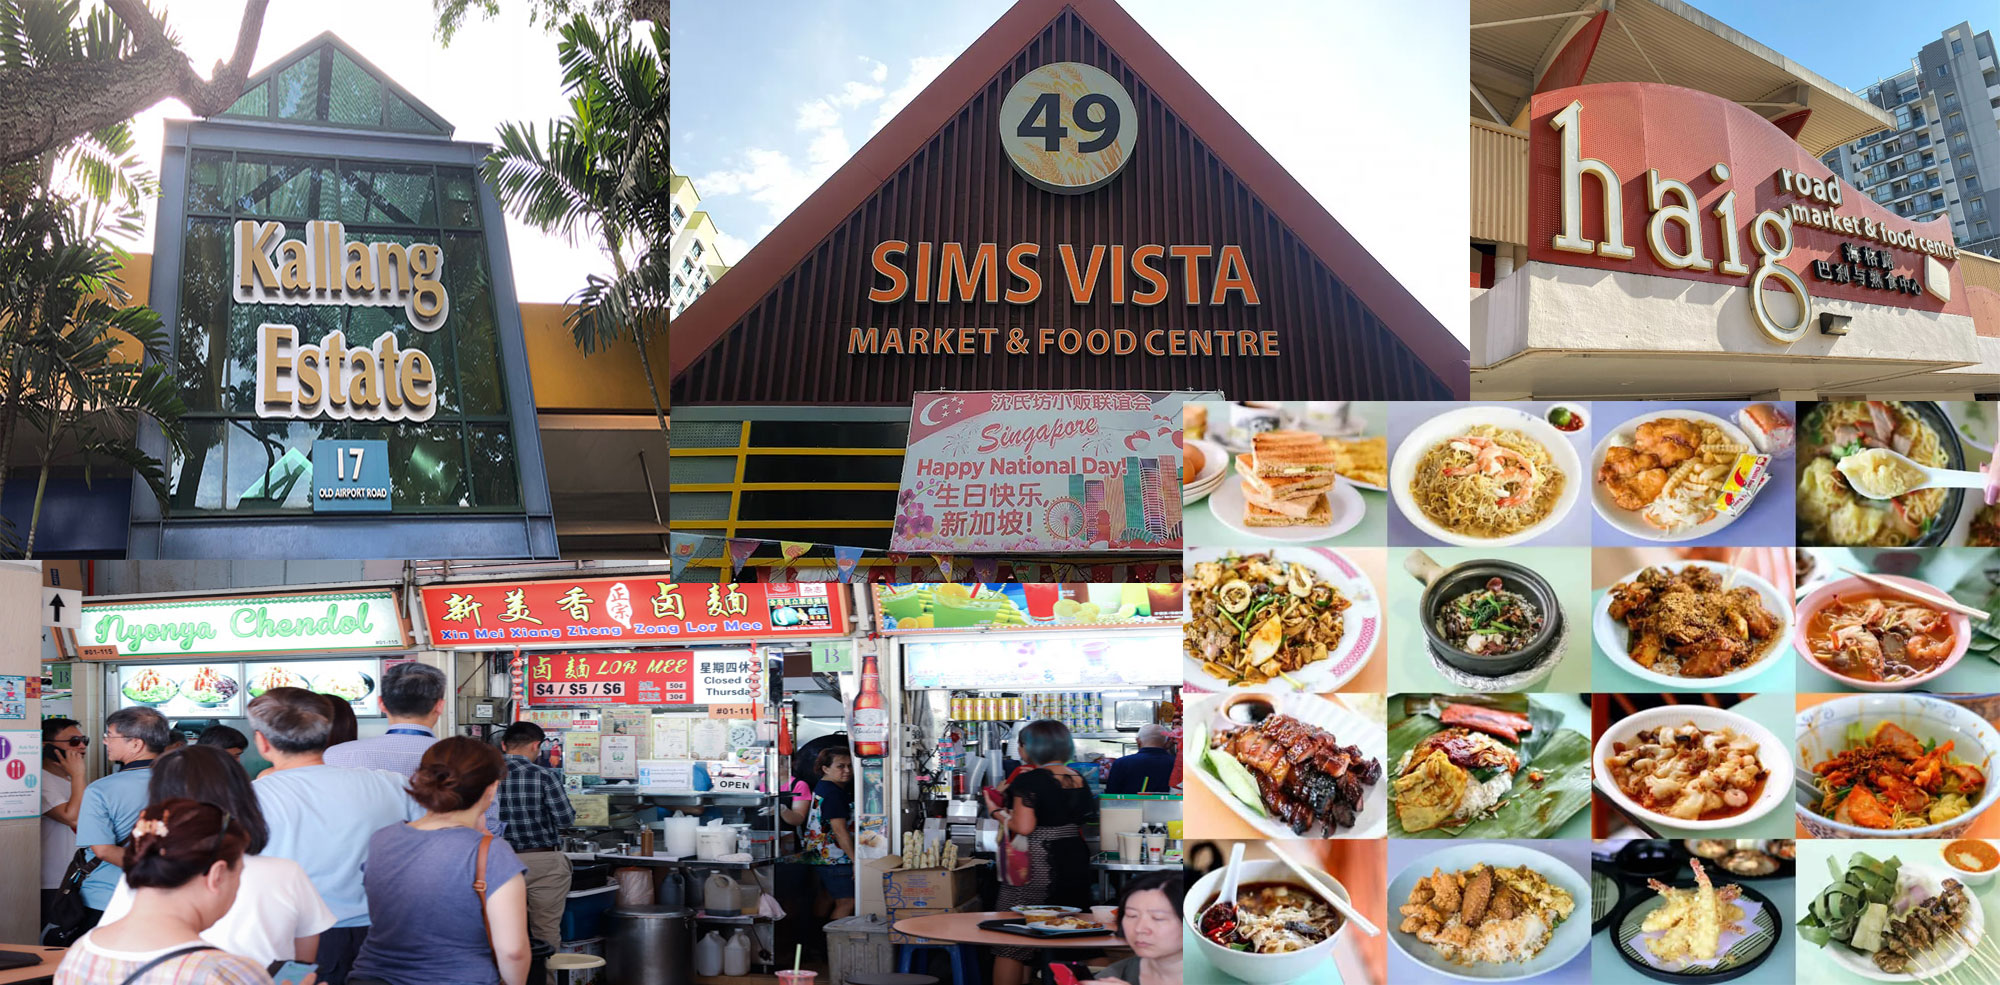 Gems Ville in Geylang - a place full of famous food markets